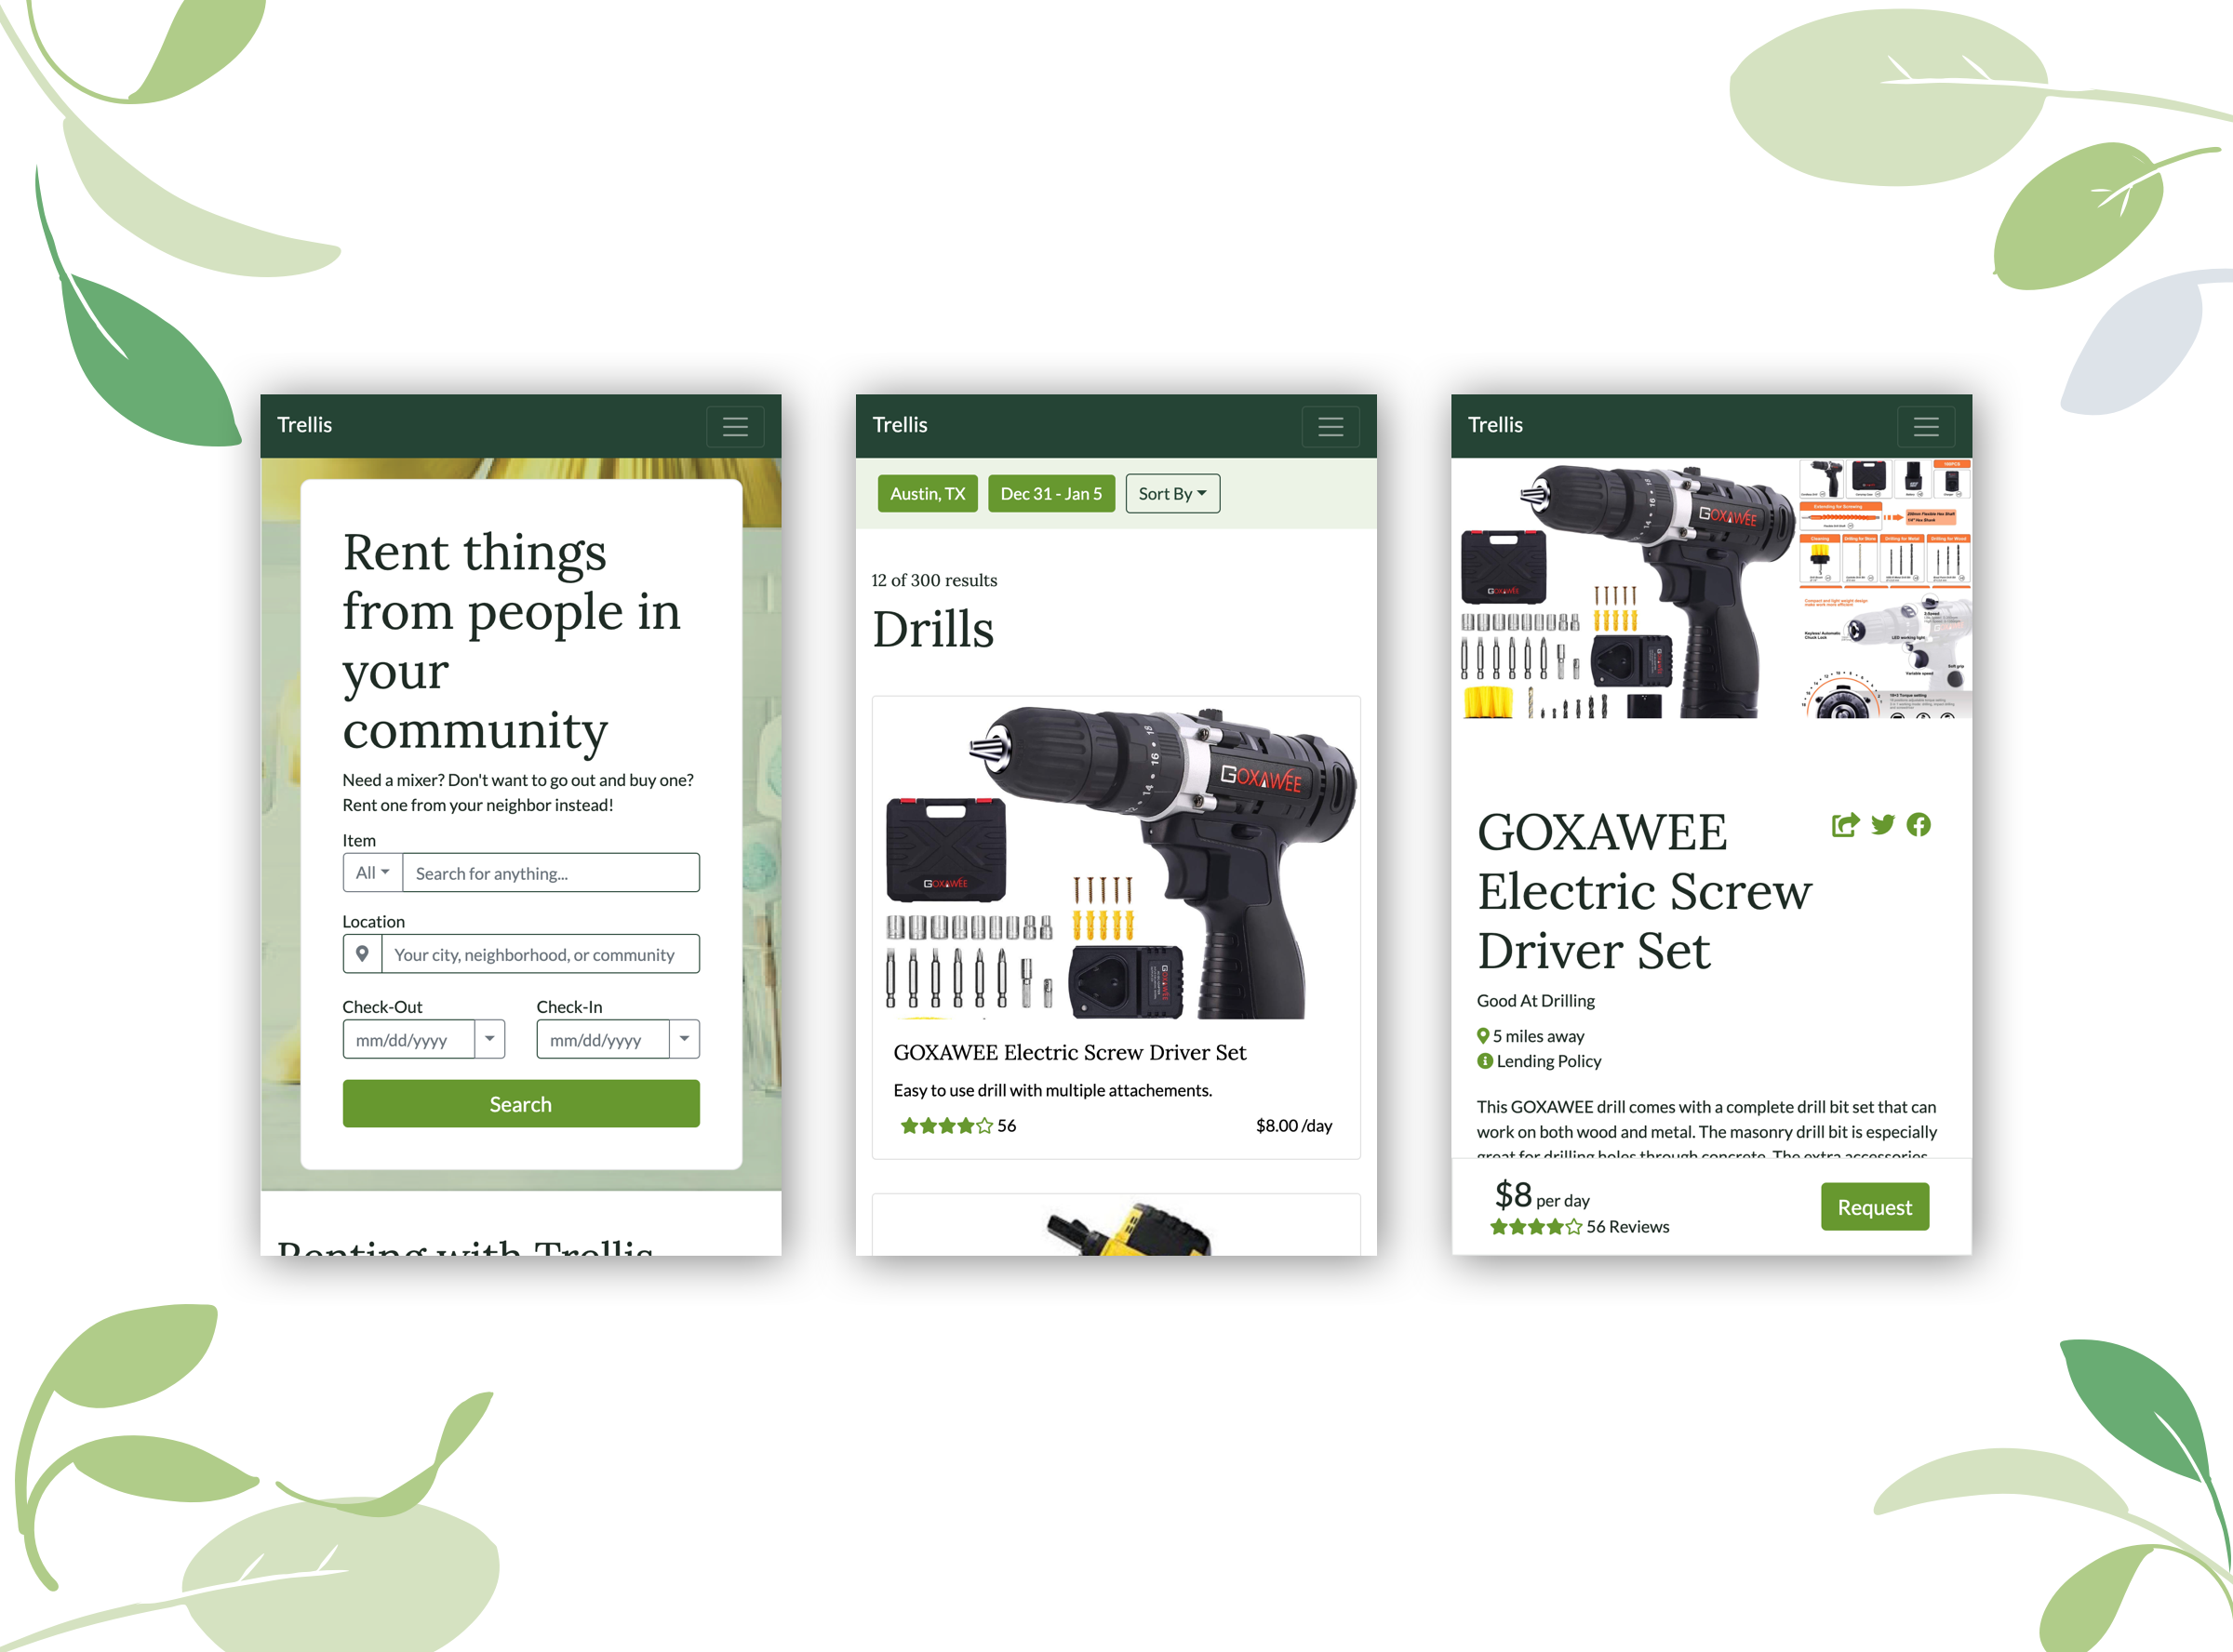 Responsive view of Trellis: Homepage, Product Search Results, and Product Page